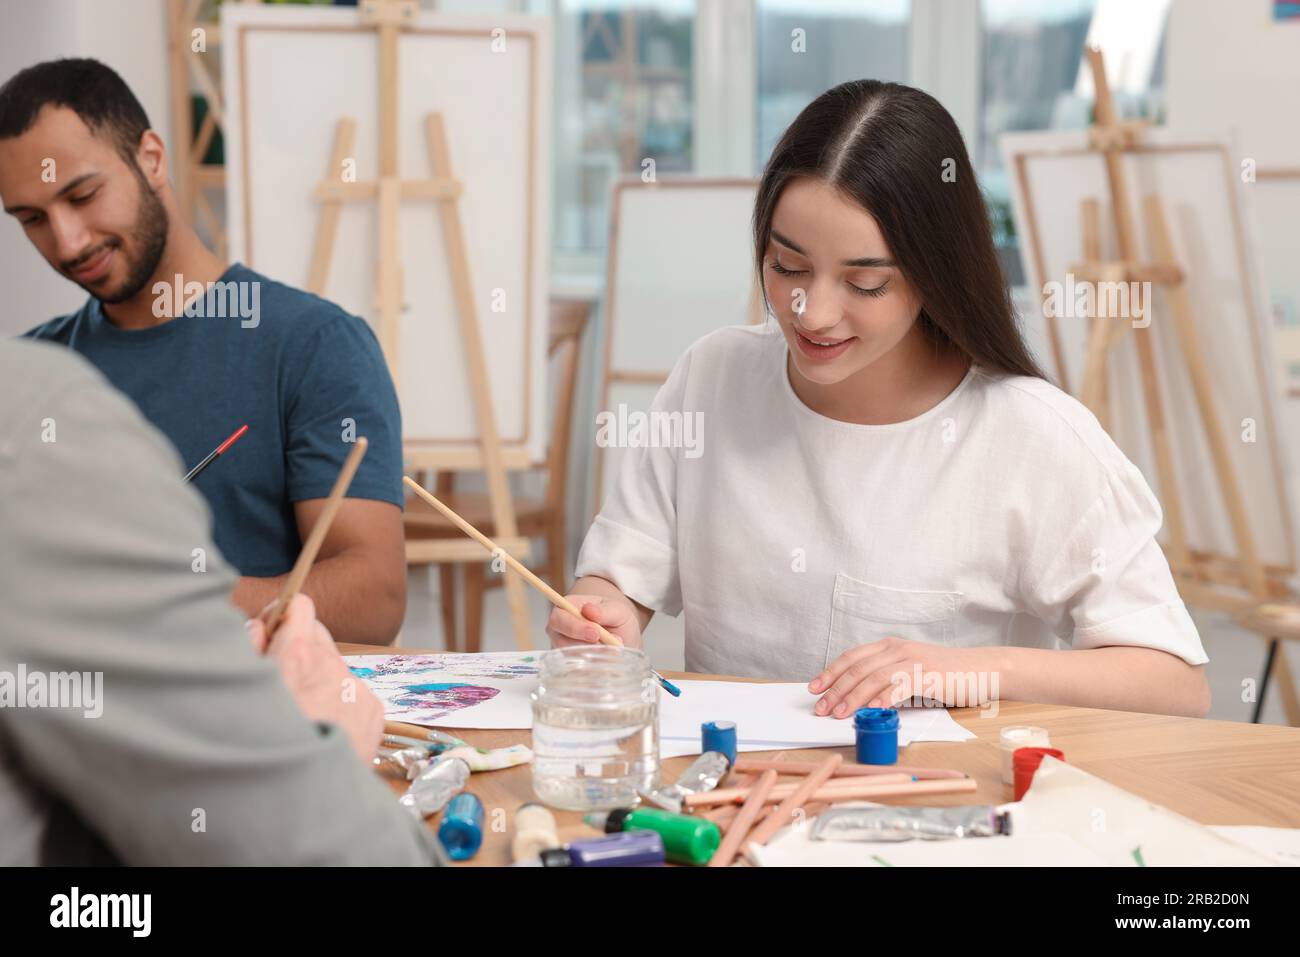 Group of students attending painting class in studio. Creative hobby Stock Photo